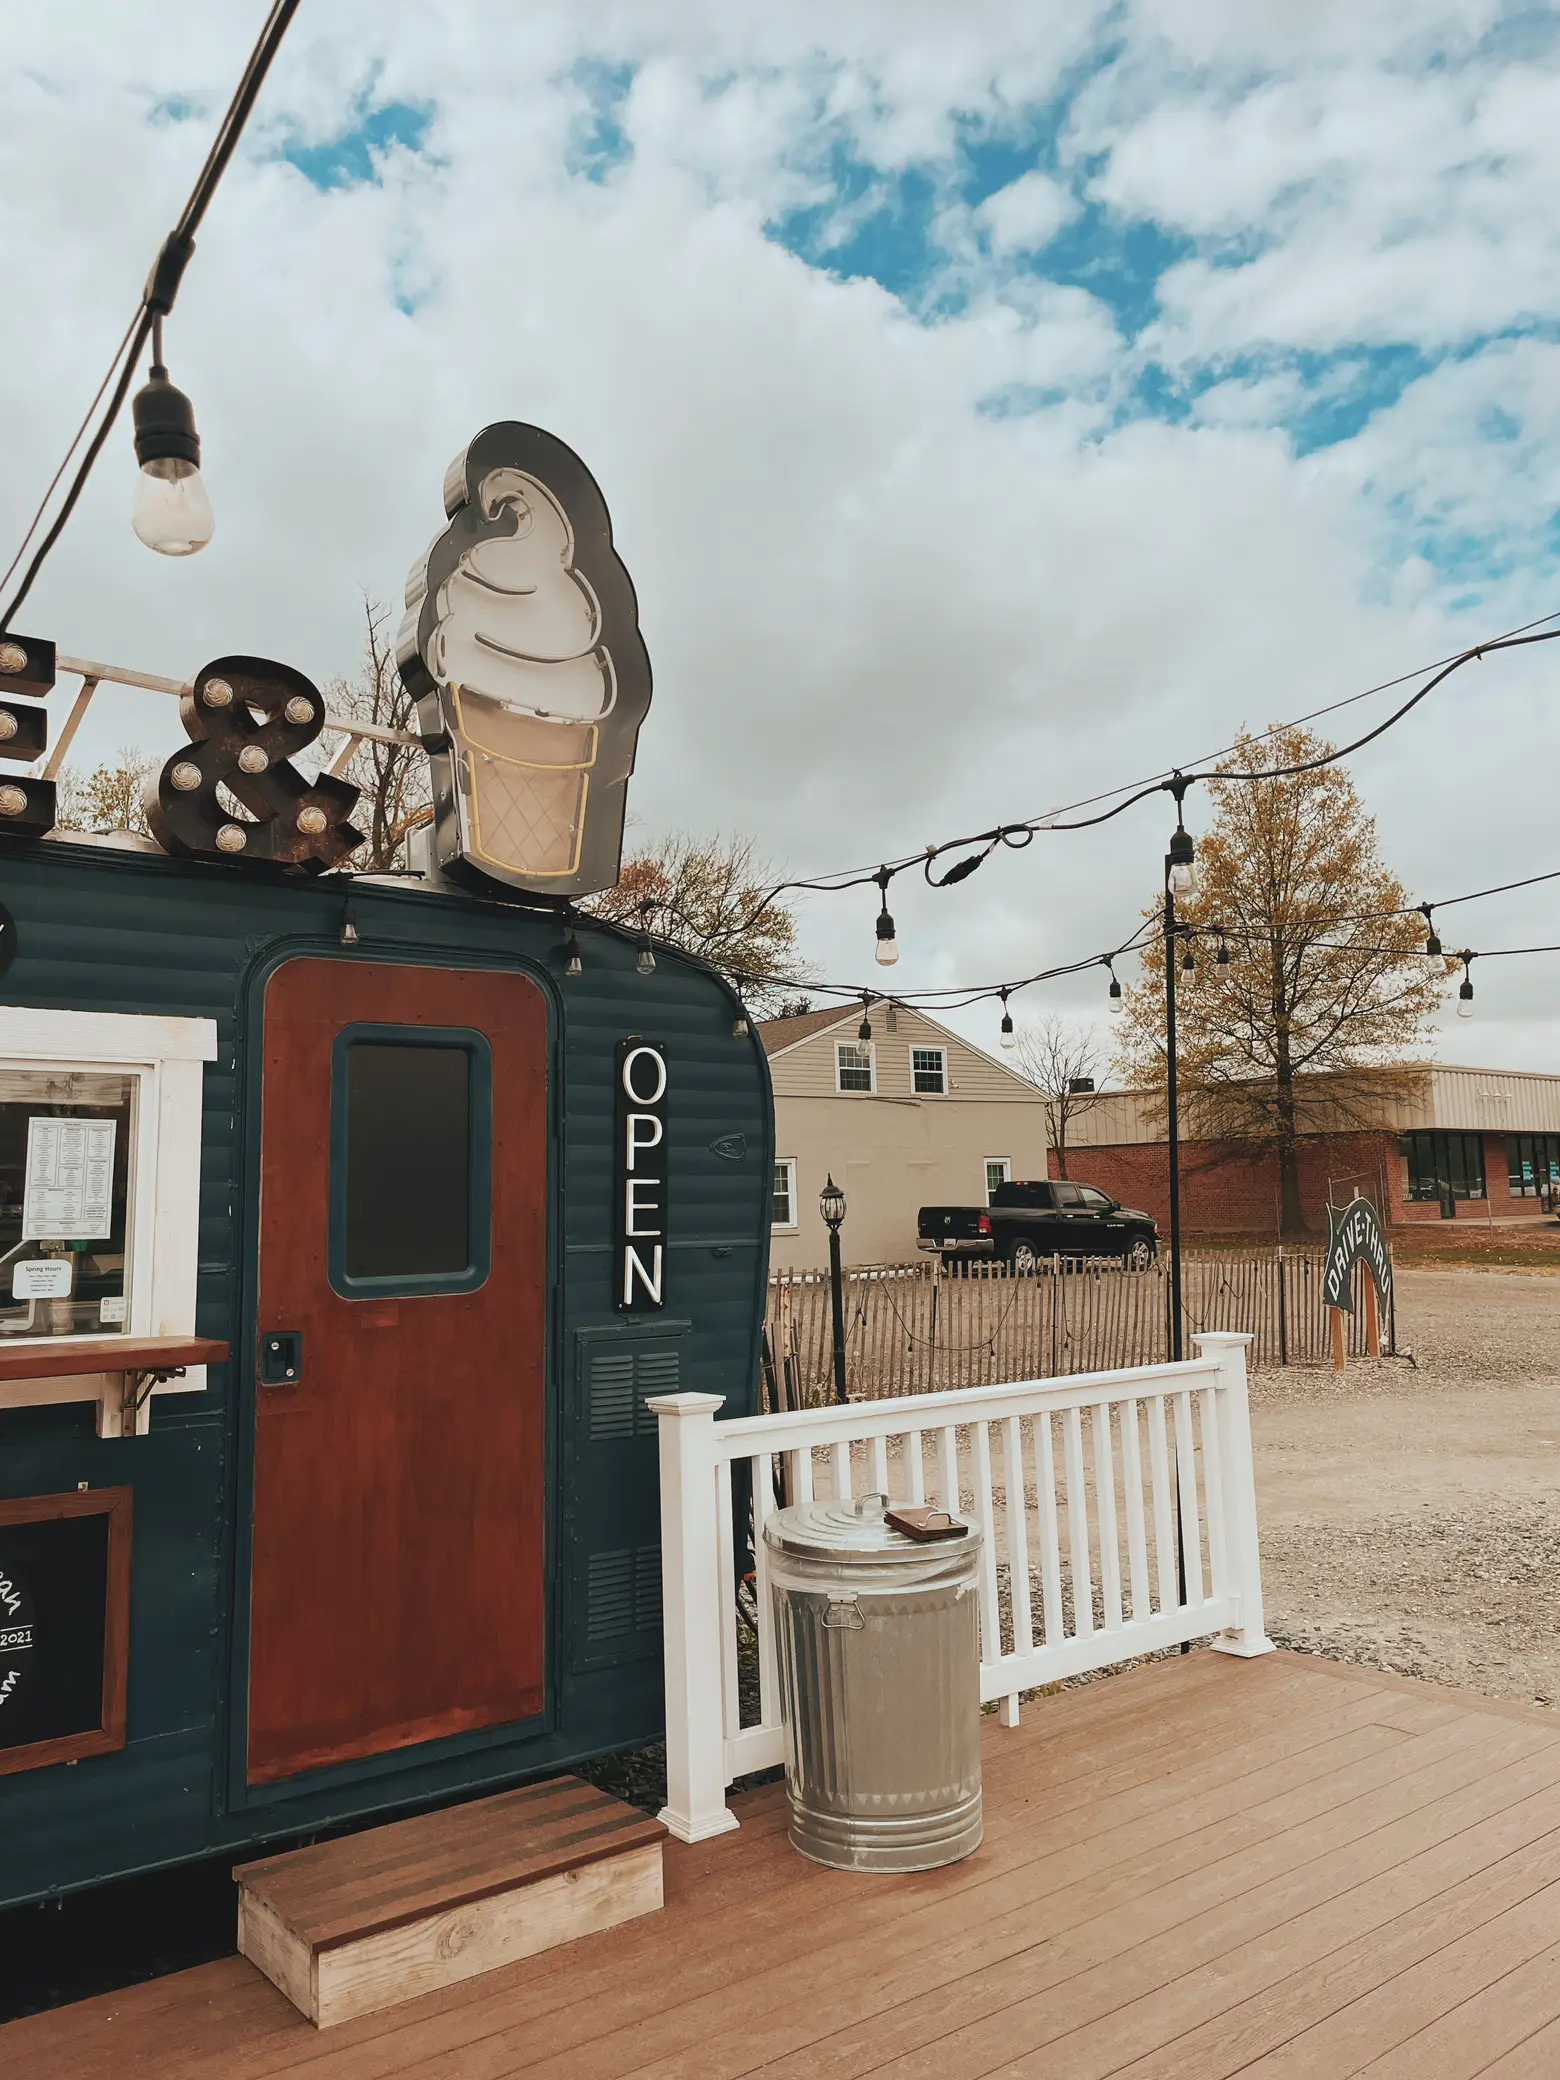  A food truck with a wooden structure and a sign that says "Open".